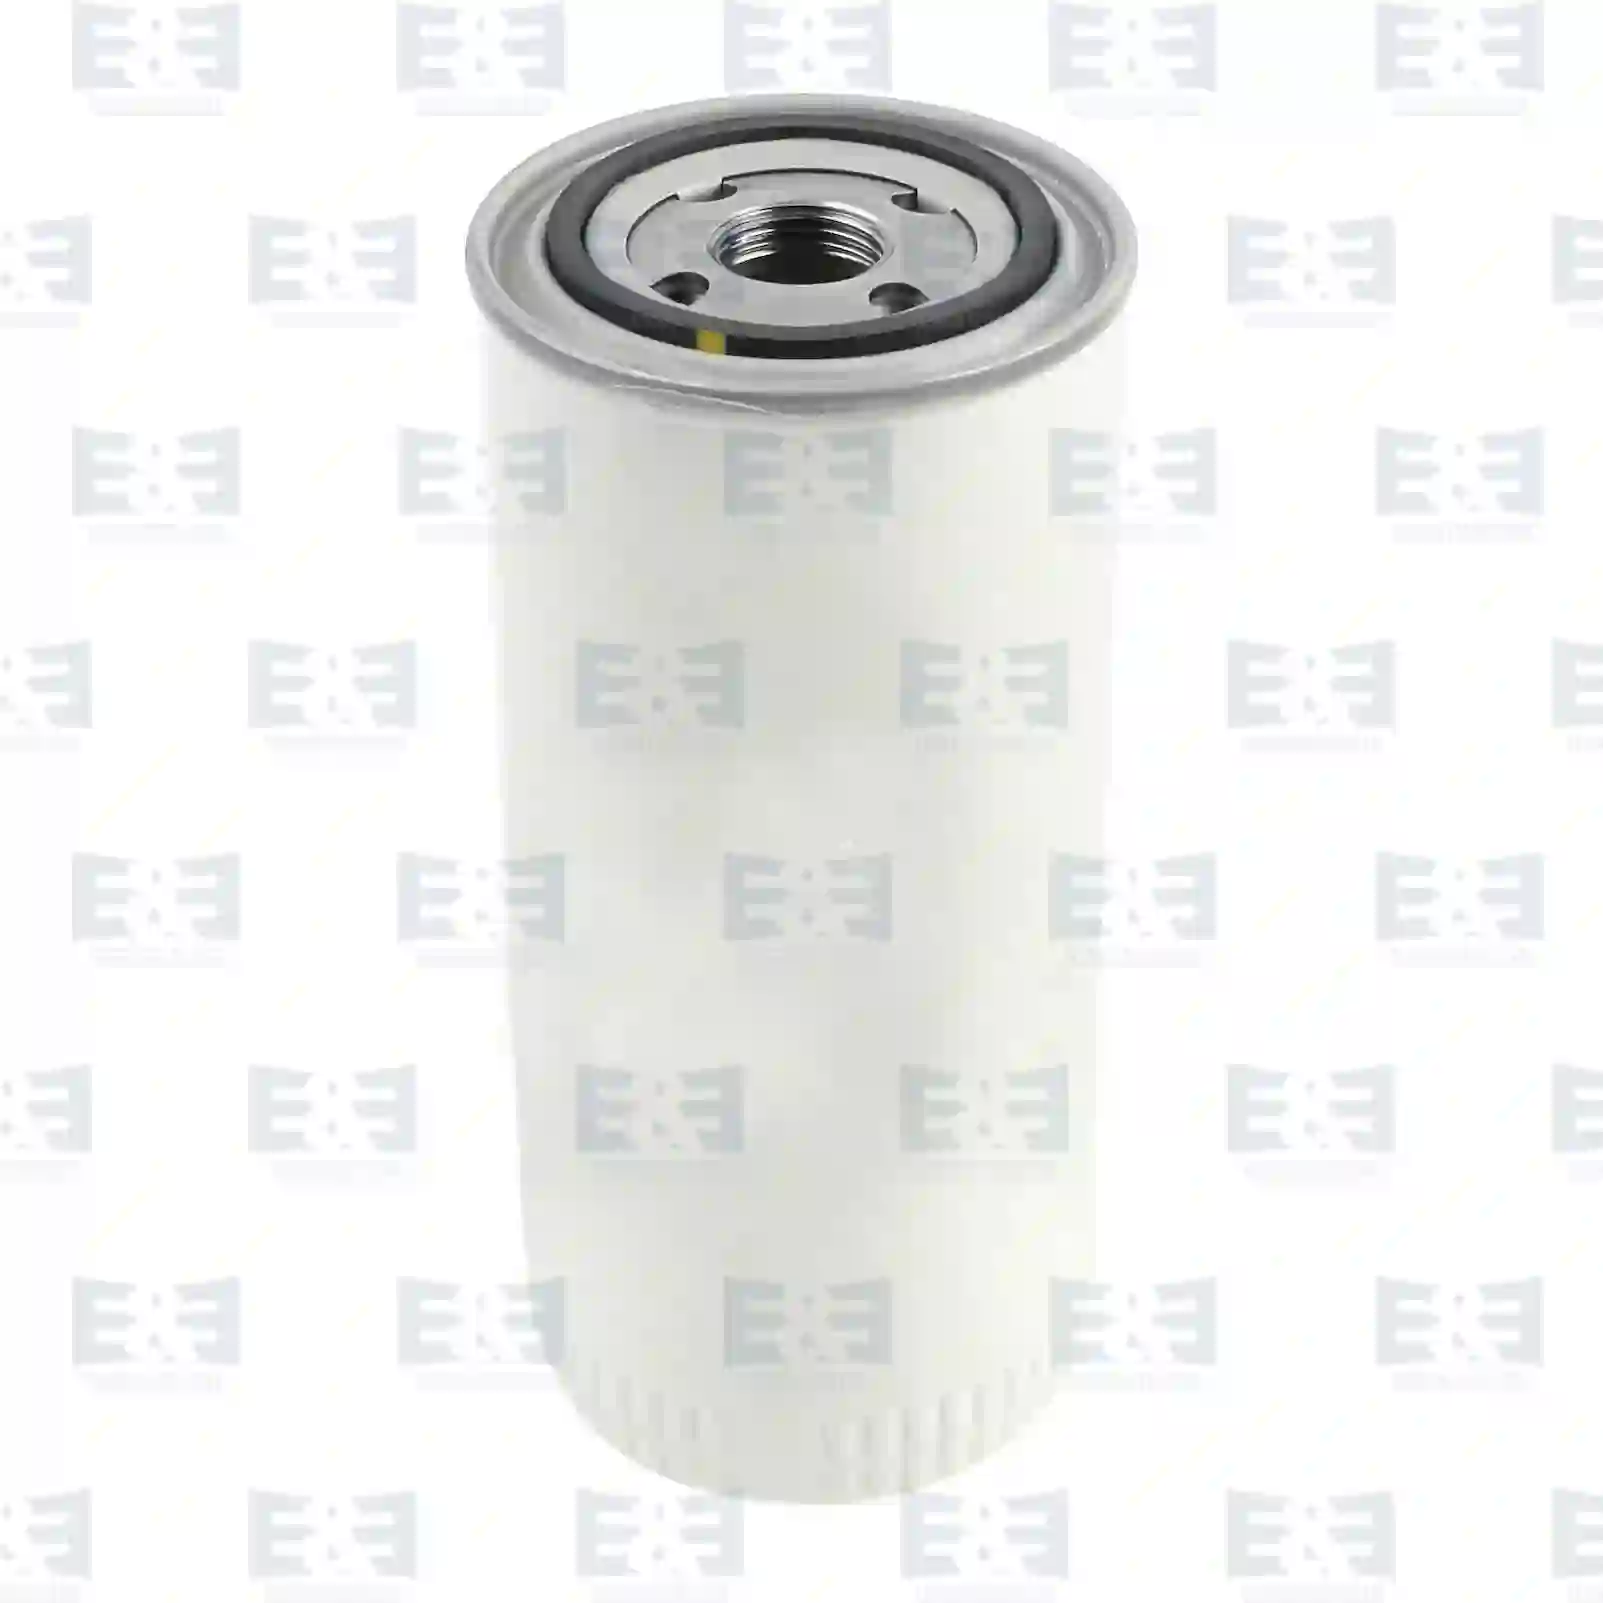 Oil filter, 2E2209526, 61671160, 61671600, 61673585, 99100208, 3055270R91, V37624, 0001160025, 1365223, 239731, 43299200, 8104266, 9830610, 2871722M1, 3055270R91, V37624, 03564103, 24564058, 24564060, 503136115, 5000670670, 07/247138, 01174421, 1621183M91, 922604, AMO42901, K1750562, R0150521, V0850559, 61000070005, 0000054020, 0000504020, 0001907947, 0004205627, 0005504020, 0014564103, 0022852900, 0024564057, 0024564103, 0500067067, 0503136115, 5000504020, 5000670670, 5000786107, 5000790787, 5000790788, 5000790822, 5000790823, 5000875107, 5000876107, 5000935525, 5000935712, 600S019751, 6750558686, 5502029, ABU8537, 41150057A, 6211489 ||  2E2209526 E&E Truck Spare Parts | Truck Spare Parts, Auotomotive Spare Parts Oil filter, 2E2209526, 61671160, 61671600, 61673585, 99100208, 3055270R91, V37624, 0001160025, 1365223, 239731, 43299200, 8104266, 9830610, 2871722M1, 3055270R91, V37624, 03564103, 24564058, 24564060, 503136115, 5000670670, 07/247138, 01174421, 1621183M91, 922604, AMO42901, K1750562, R0150521, V0850559, 61000070005, 0000054020, 0000504020, 0001907947, 0004205627, 0005504020, 0014564103, 0022852900, 0024564057, 0024564103, 0500067067, 0503136115, 5000504020, 5000670670, 5000786107, 5000790787, 5000790788, 5000790822, 5000790823, 5000875107, 5000876107, 5000935525, 5000935712, 600S019751, 6750558686, 5502029, ABU8537, 41150057A, 6211489 ||  2E2209526 E&E Truck Spare Parts | Truck Spare Parts, Auotomotive Spare Parts